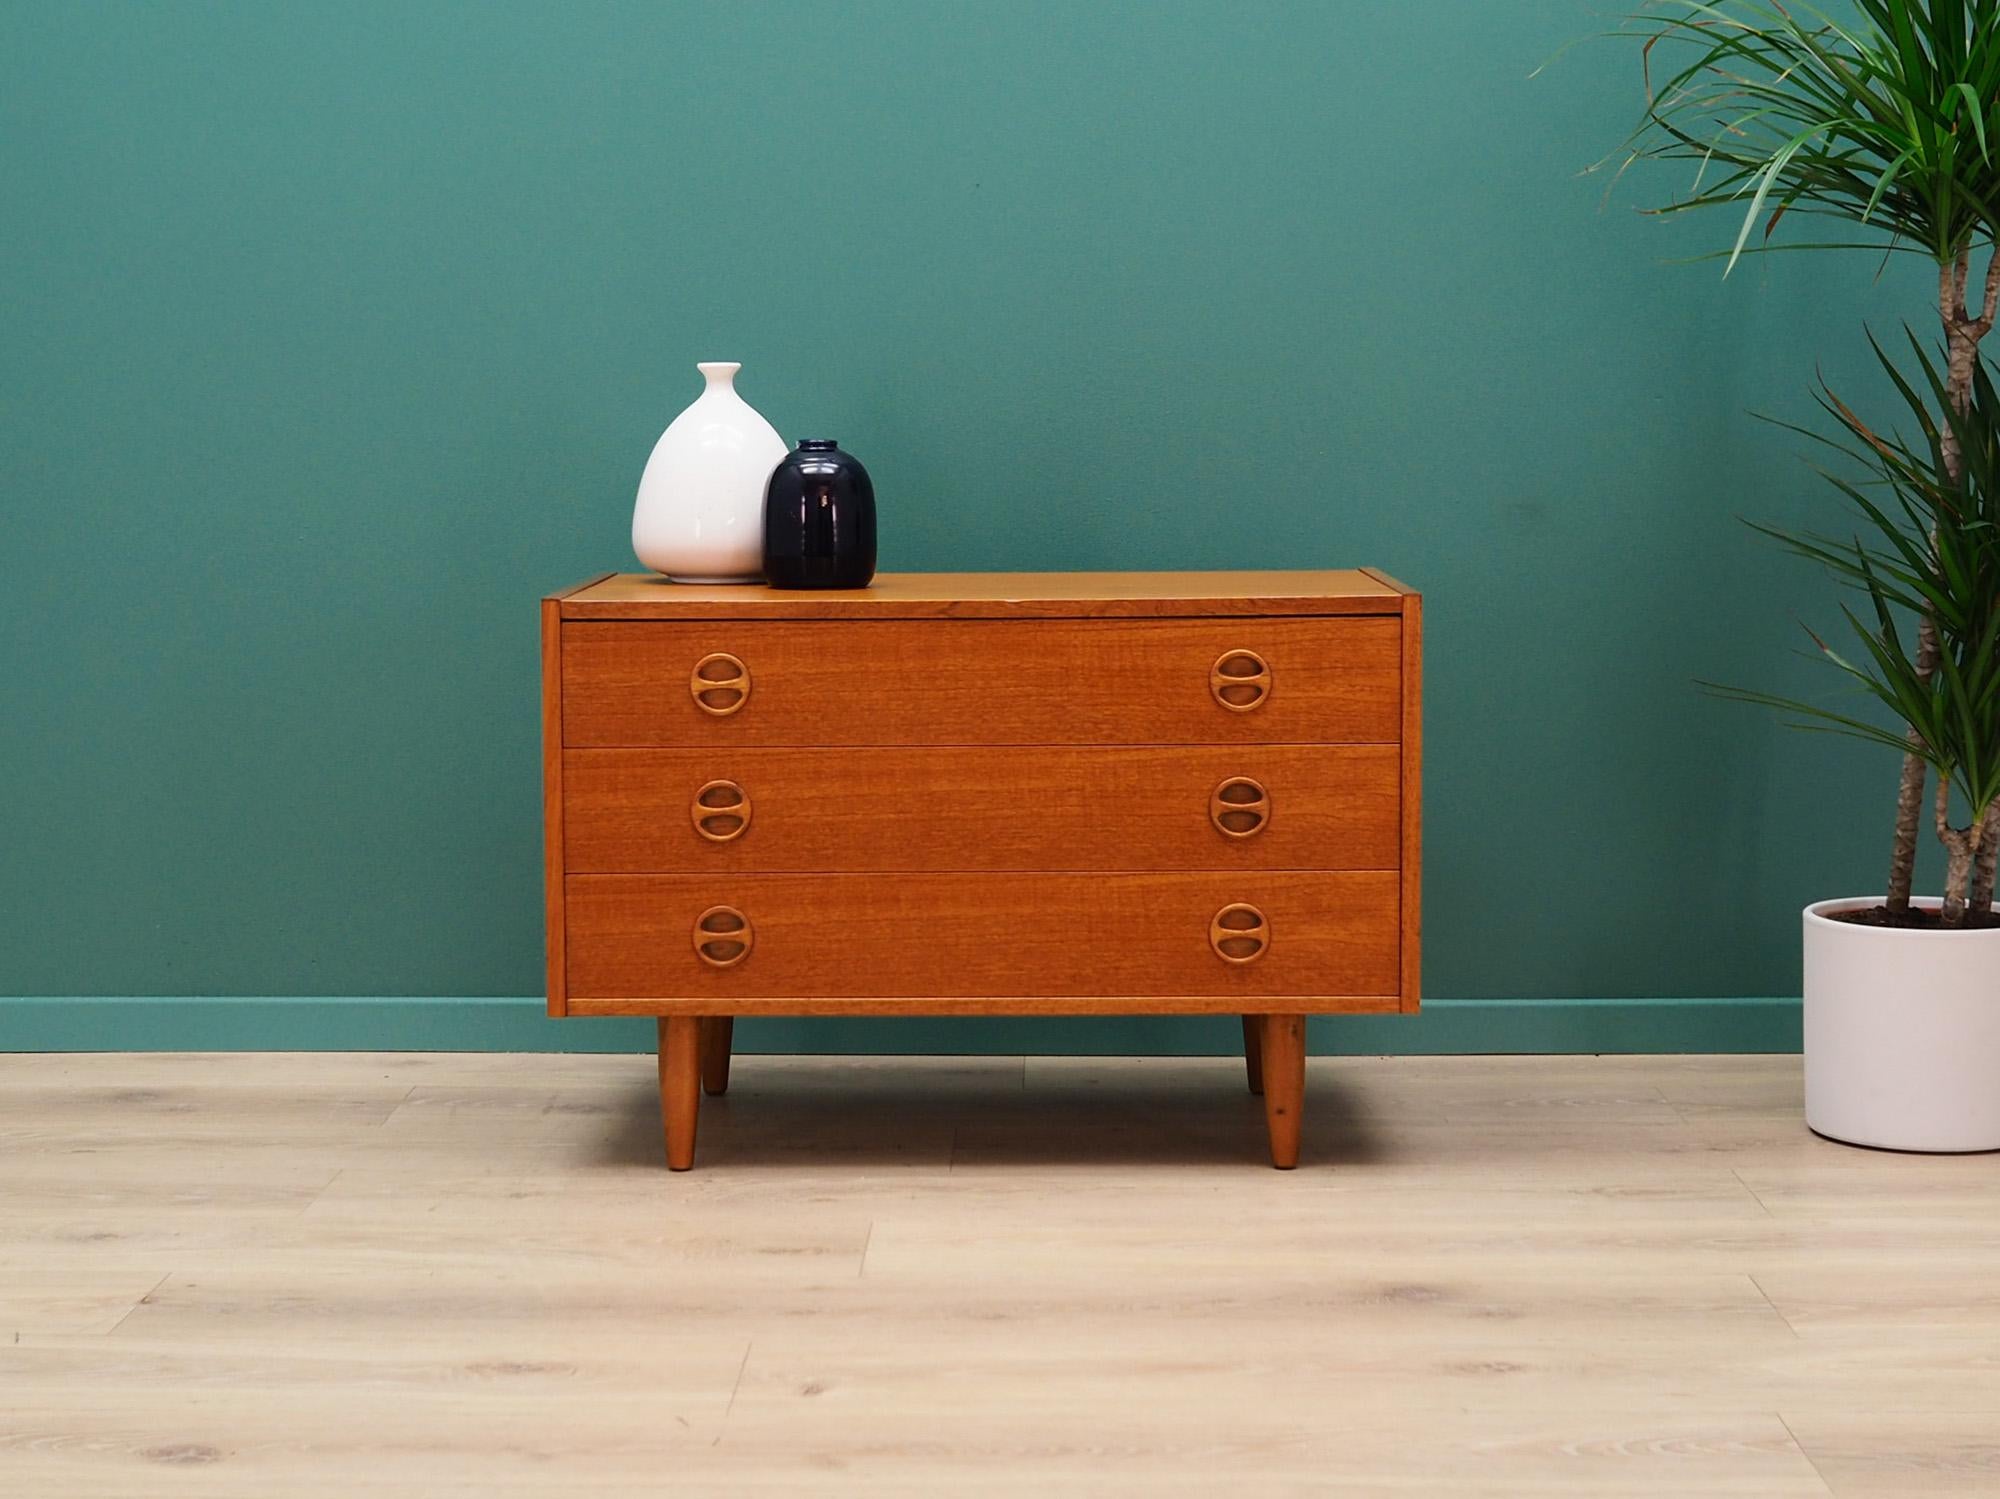 Classic chest of drawers from the 1960s-1970s. Scandinavian design, Minimalist form. Surface finished with teak veneer. Furniture with three drawers. Preserved in good condition (minor bruises and scratches), directly for use.

Dimensions: height